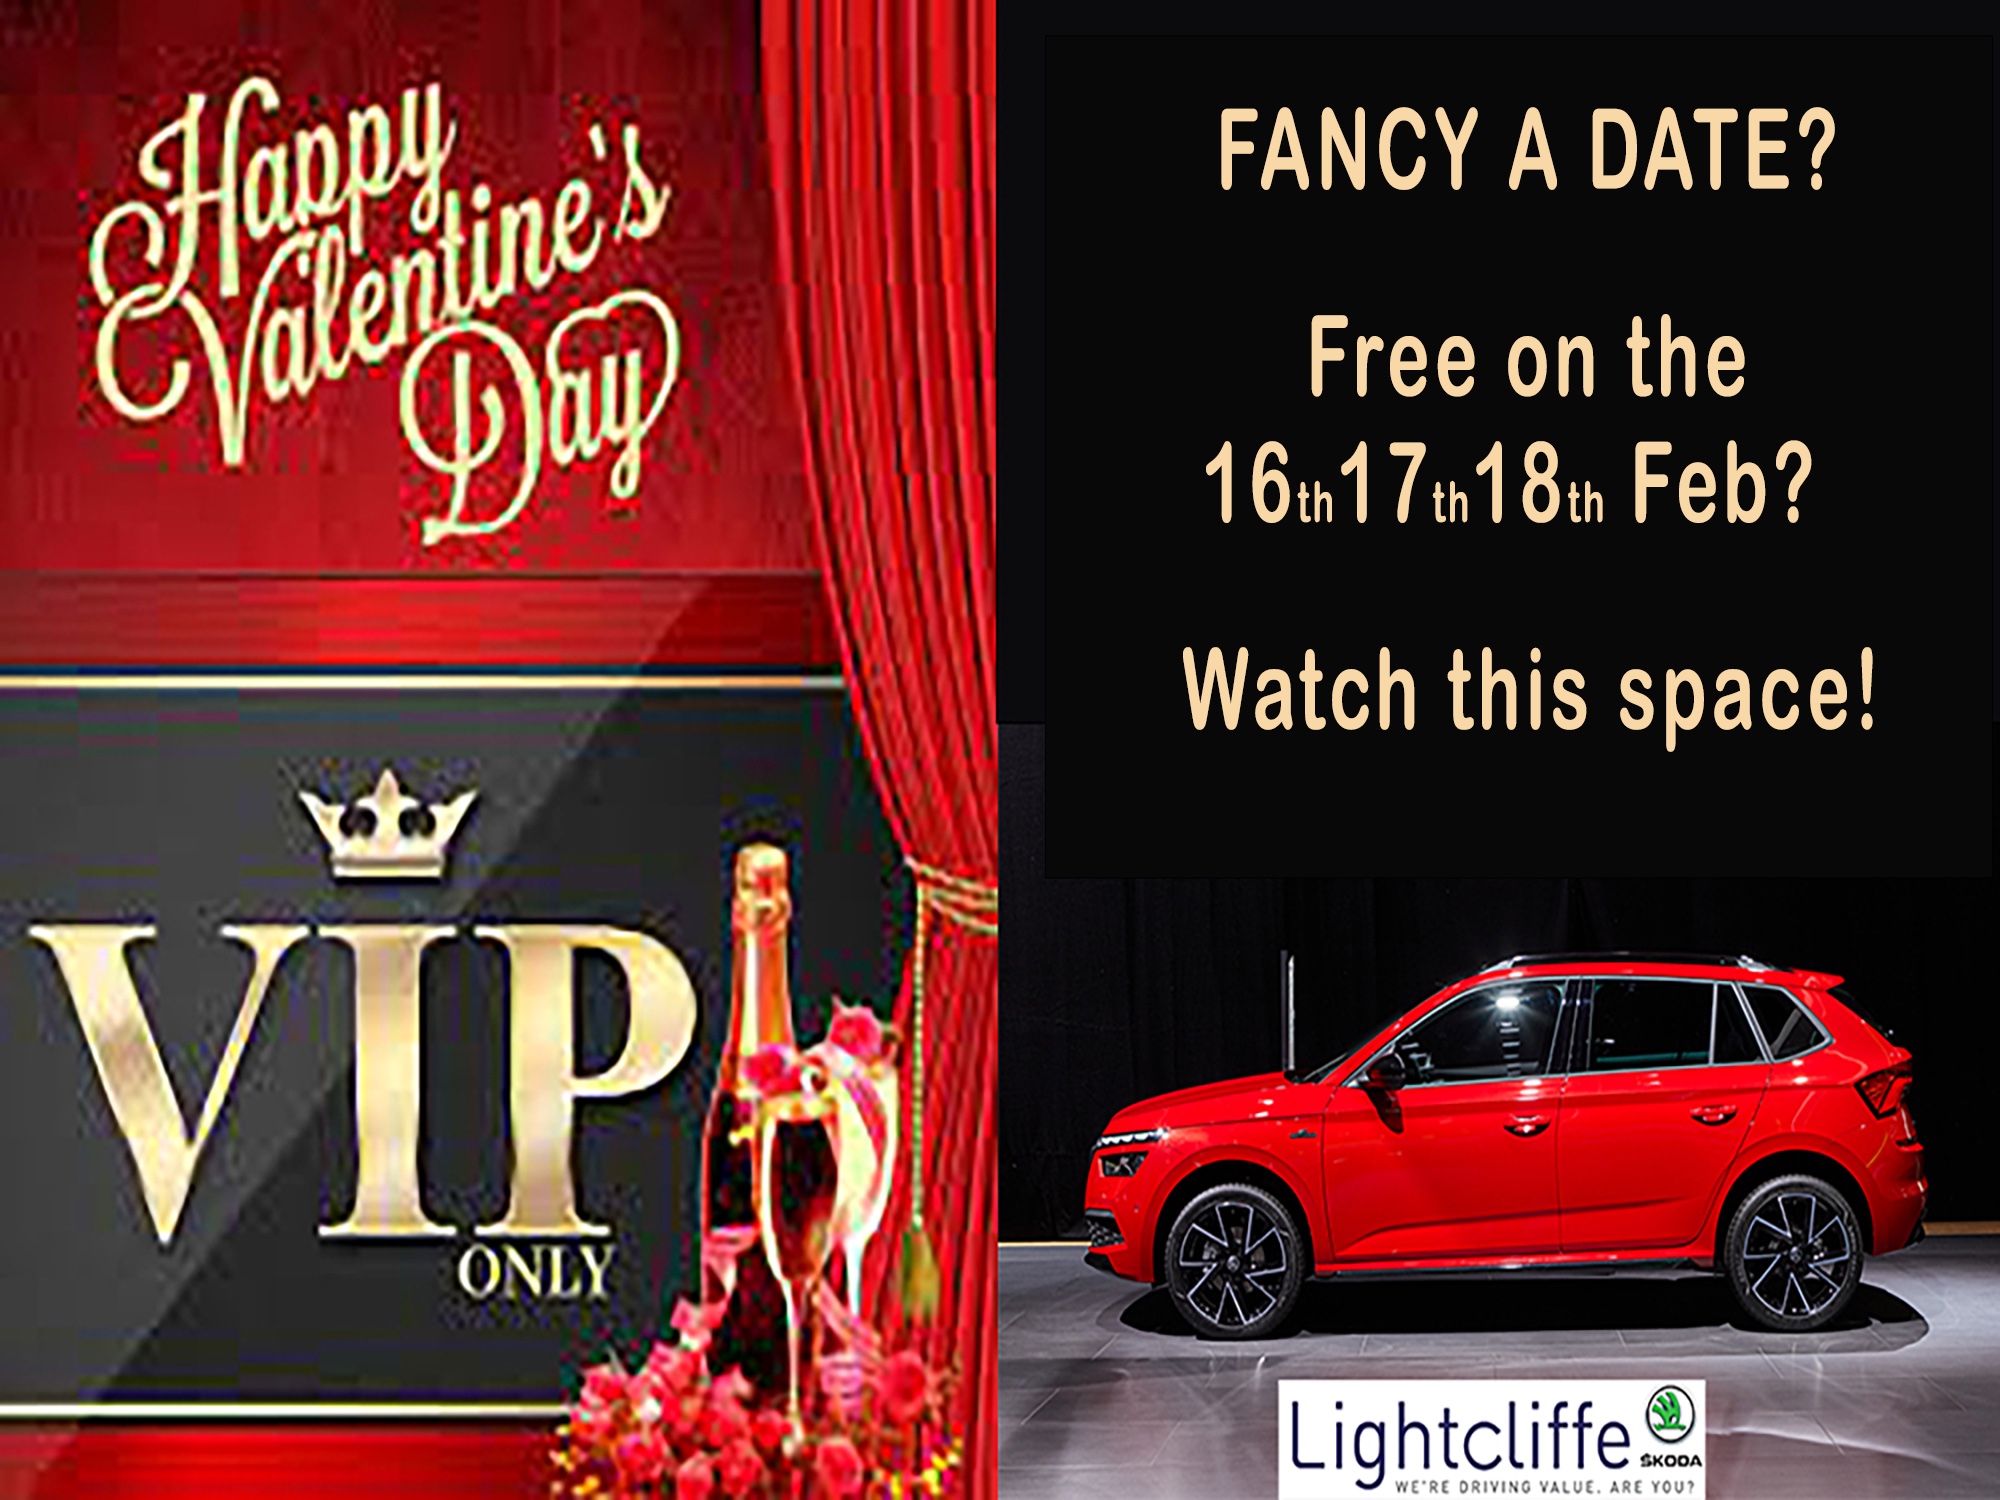 Make a Date With Your Dream Car